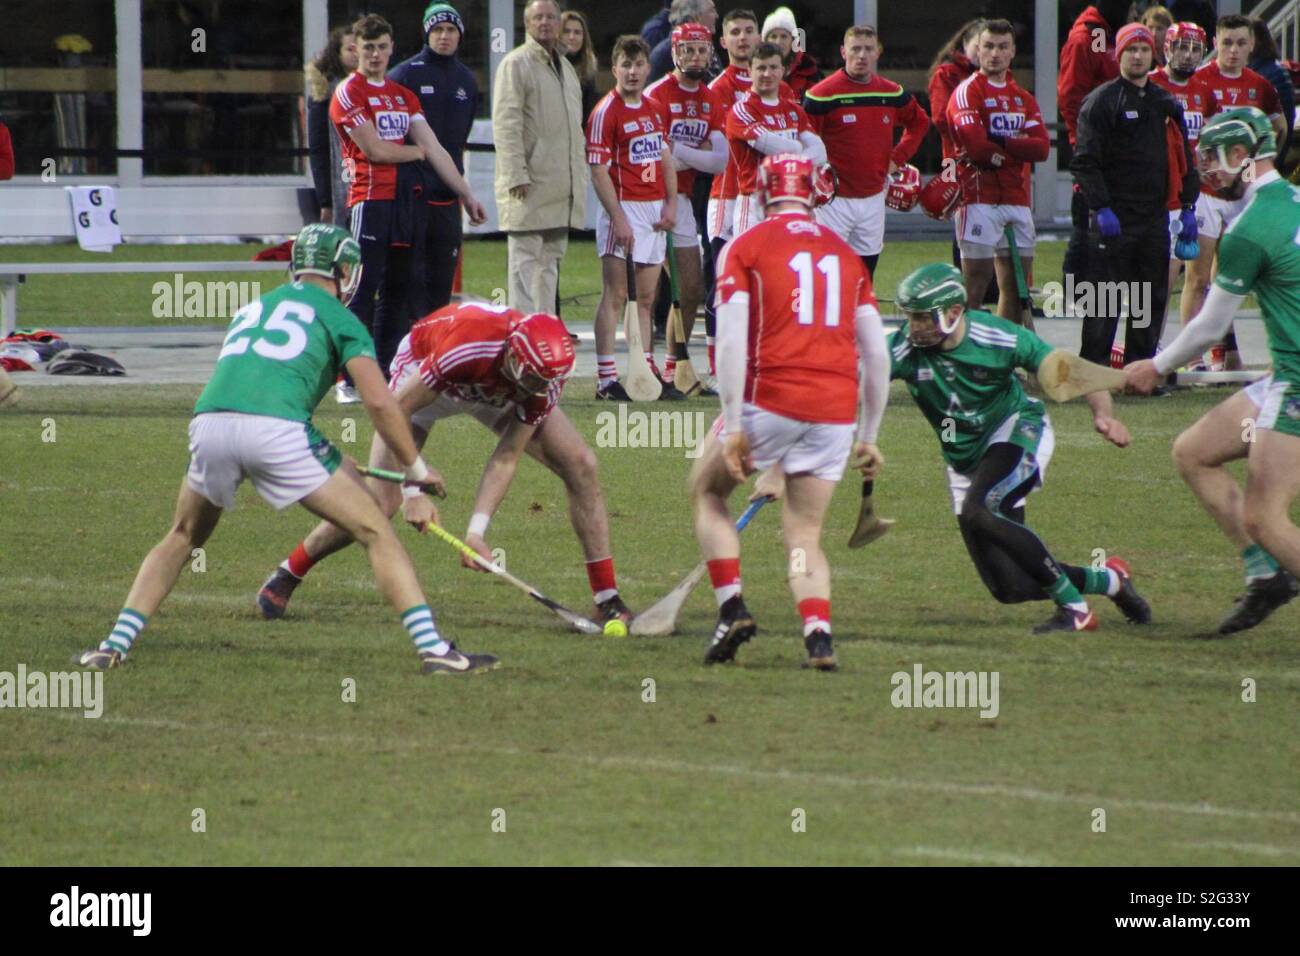 Action from the Limerick versus cork hurling final of the Fenway classic at Fenway Park Boston Massachusetts. Stock Photo